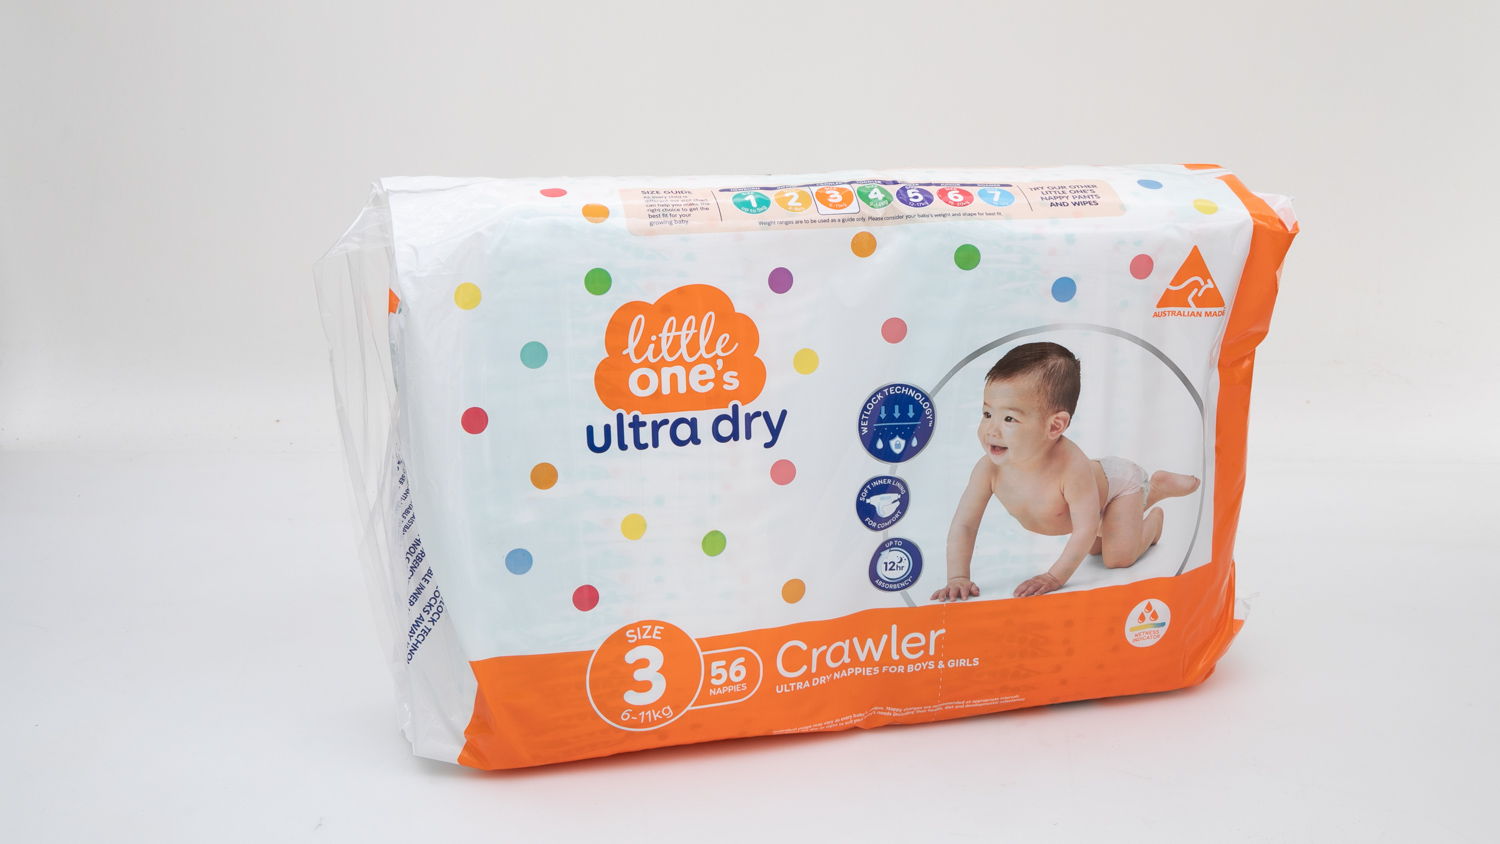 Woolworths Little One's Ultra Dry Size 3 Crawler carousel image